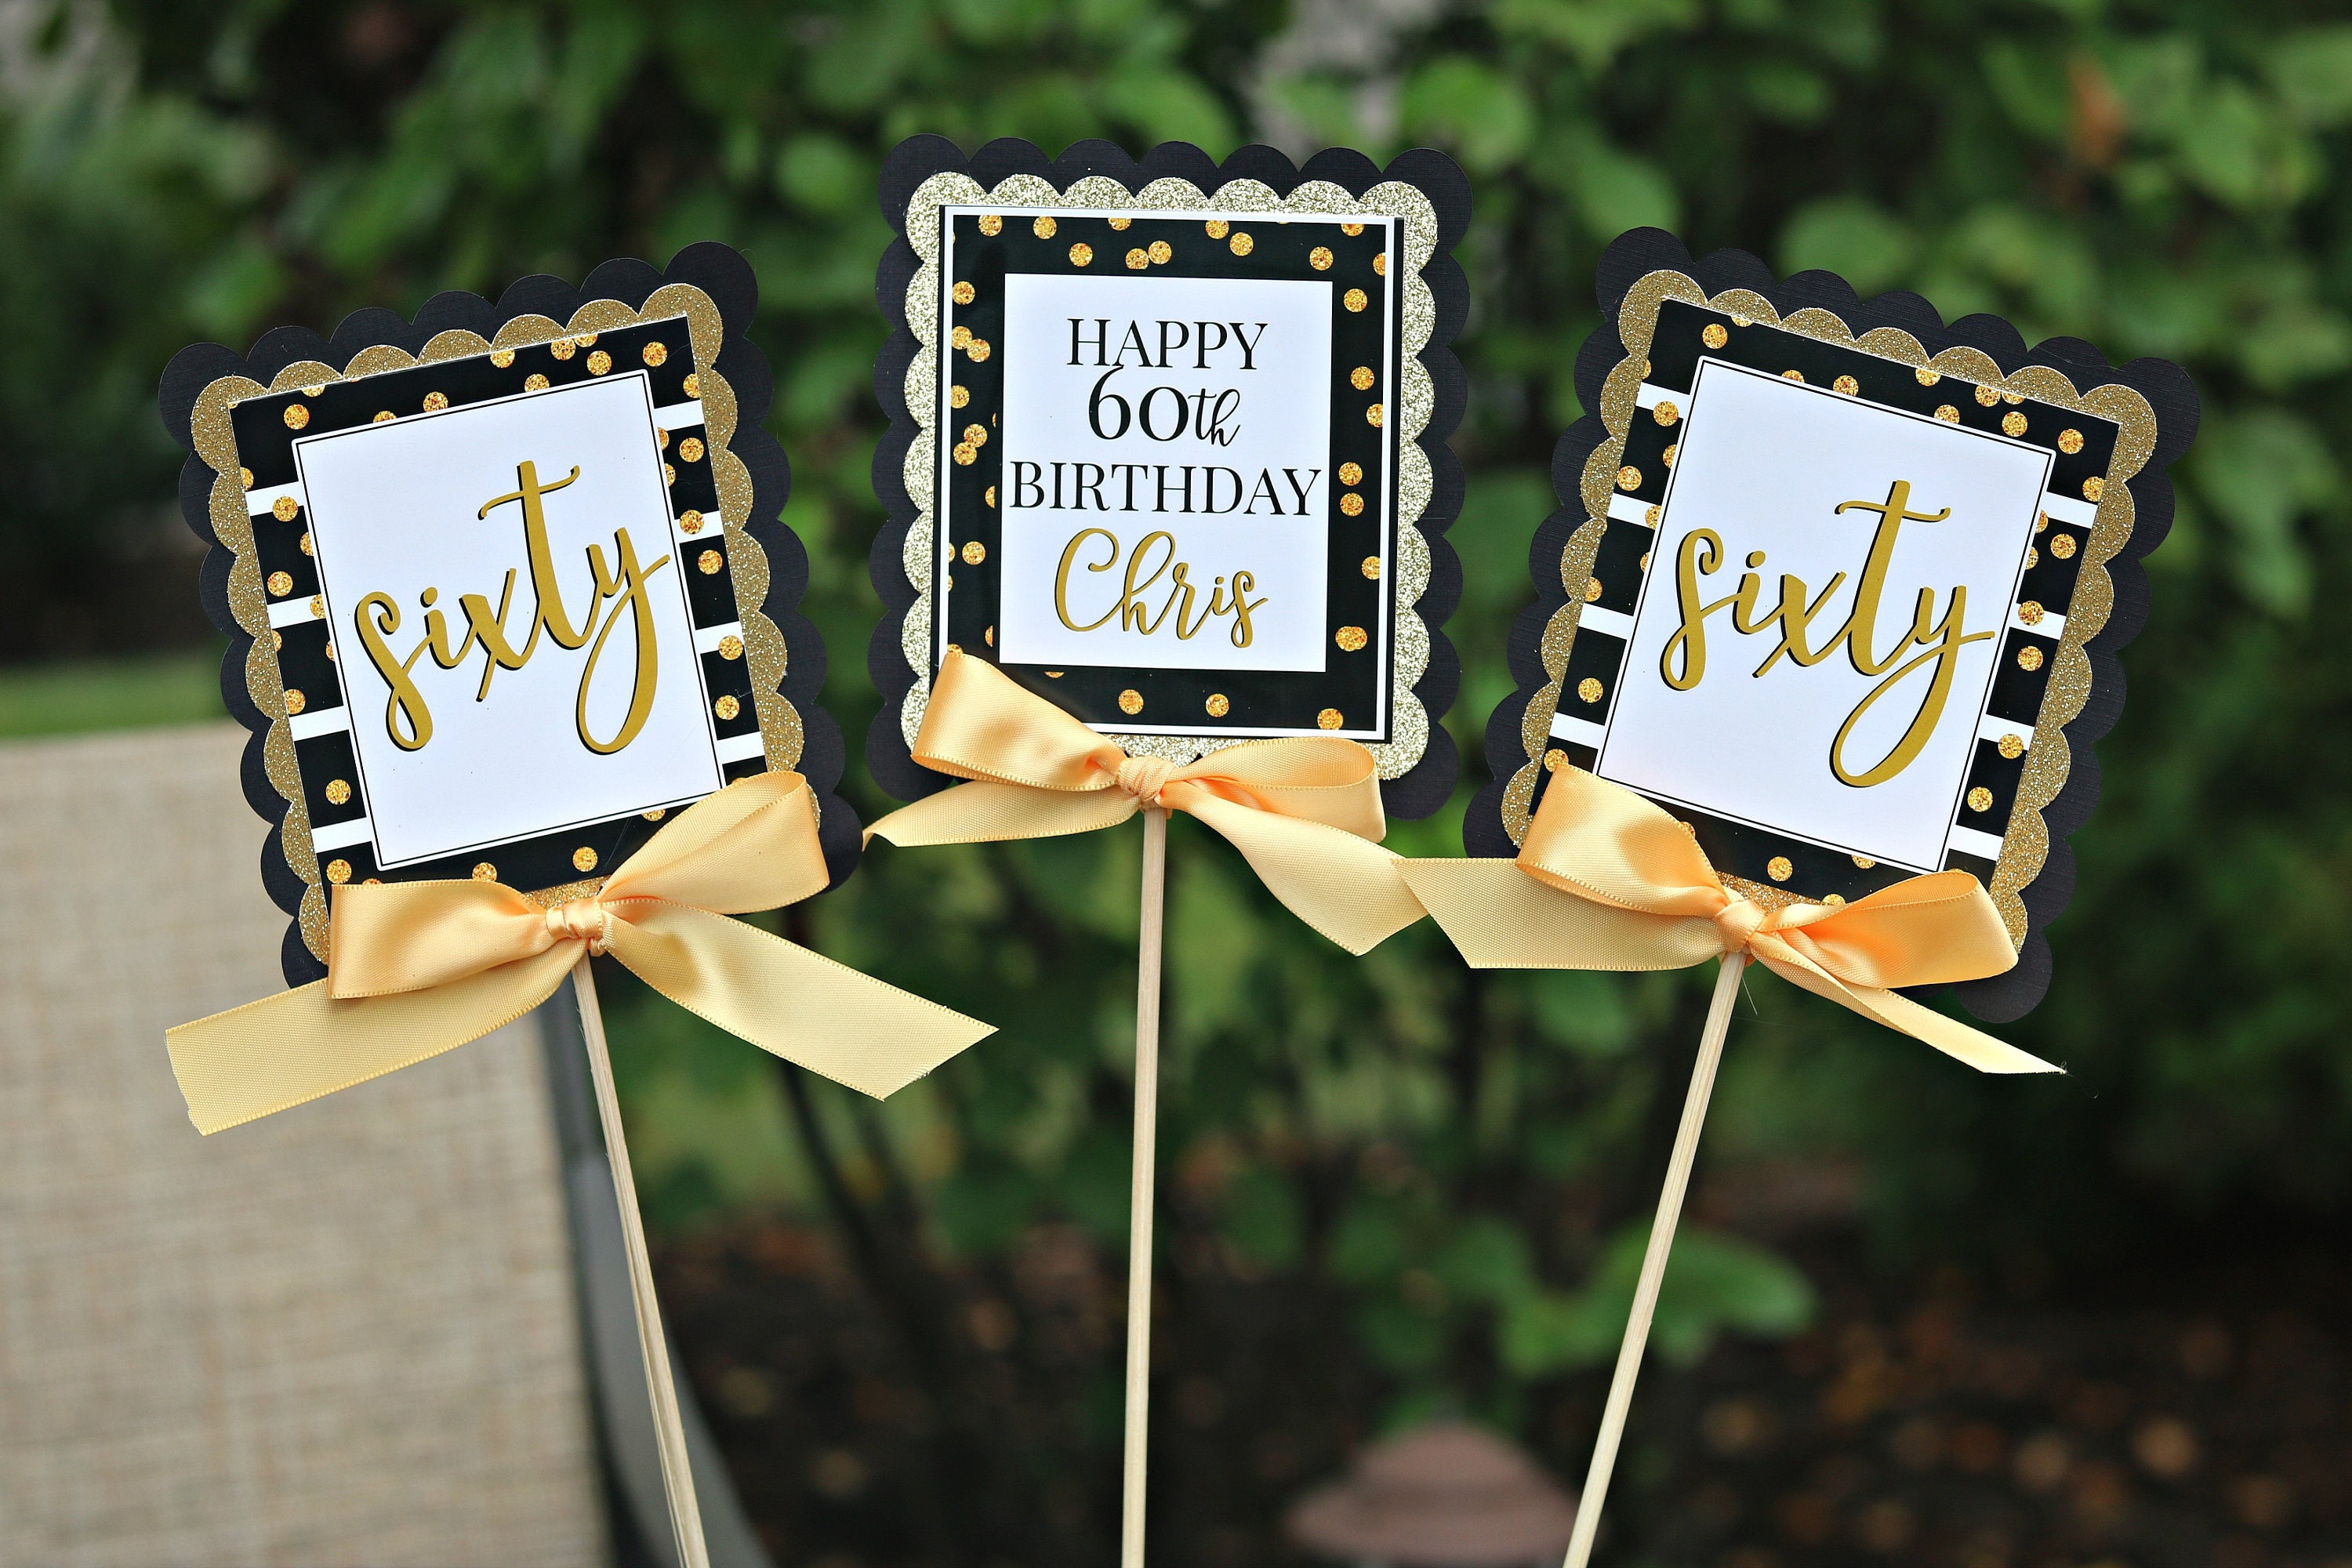  8 Pieces Gold and Blue 60th Birthday Table Centerpieces, 60th  Birthday Honeycomb Table Centerpieces, 60th Birthday Table Decorations  Birthday Party Supplies for 60th Table Birthday Decorations : Toys & Games